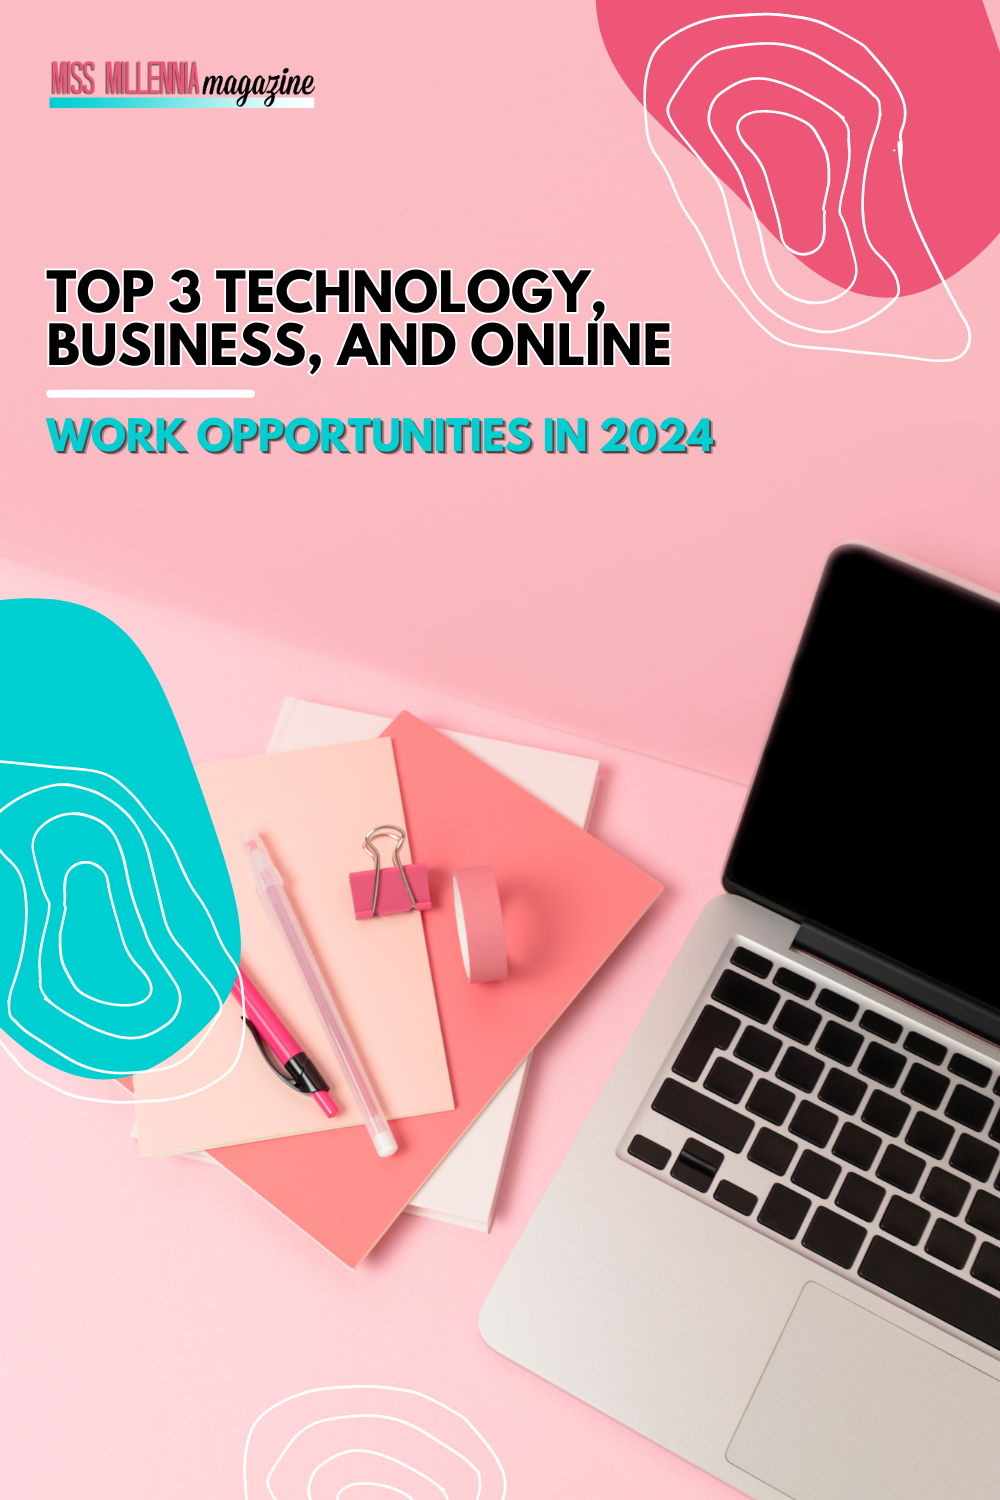 Top 3 Technology, Business, and Online Work Opportunities in 2024